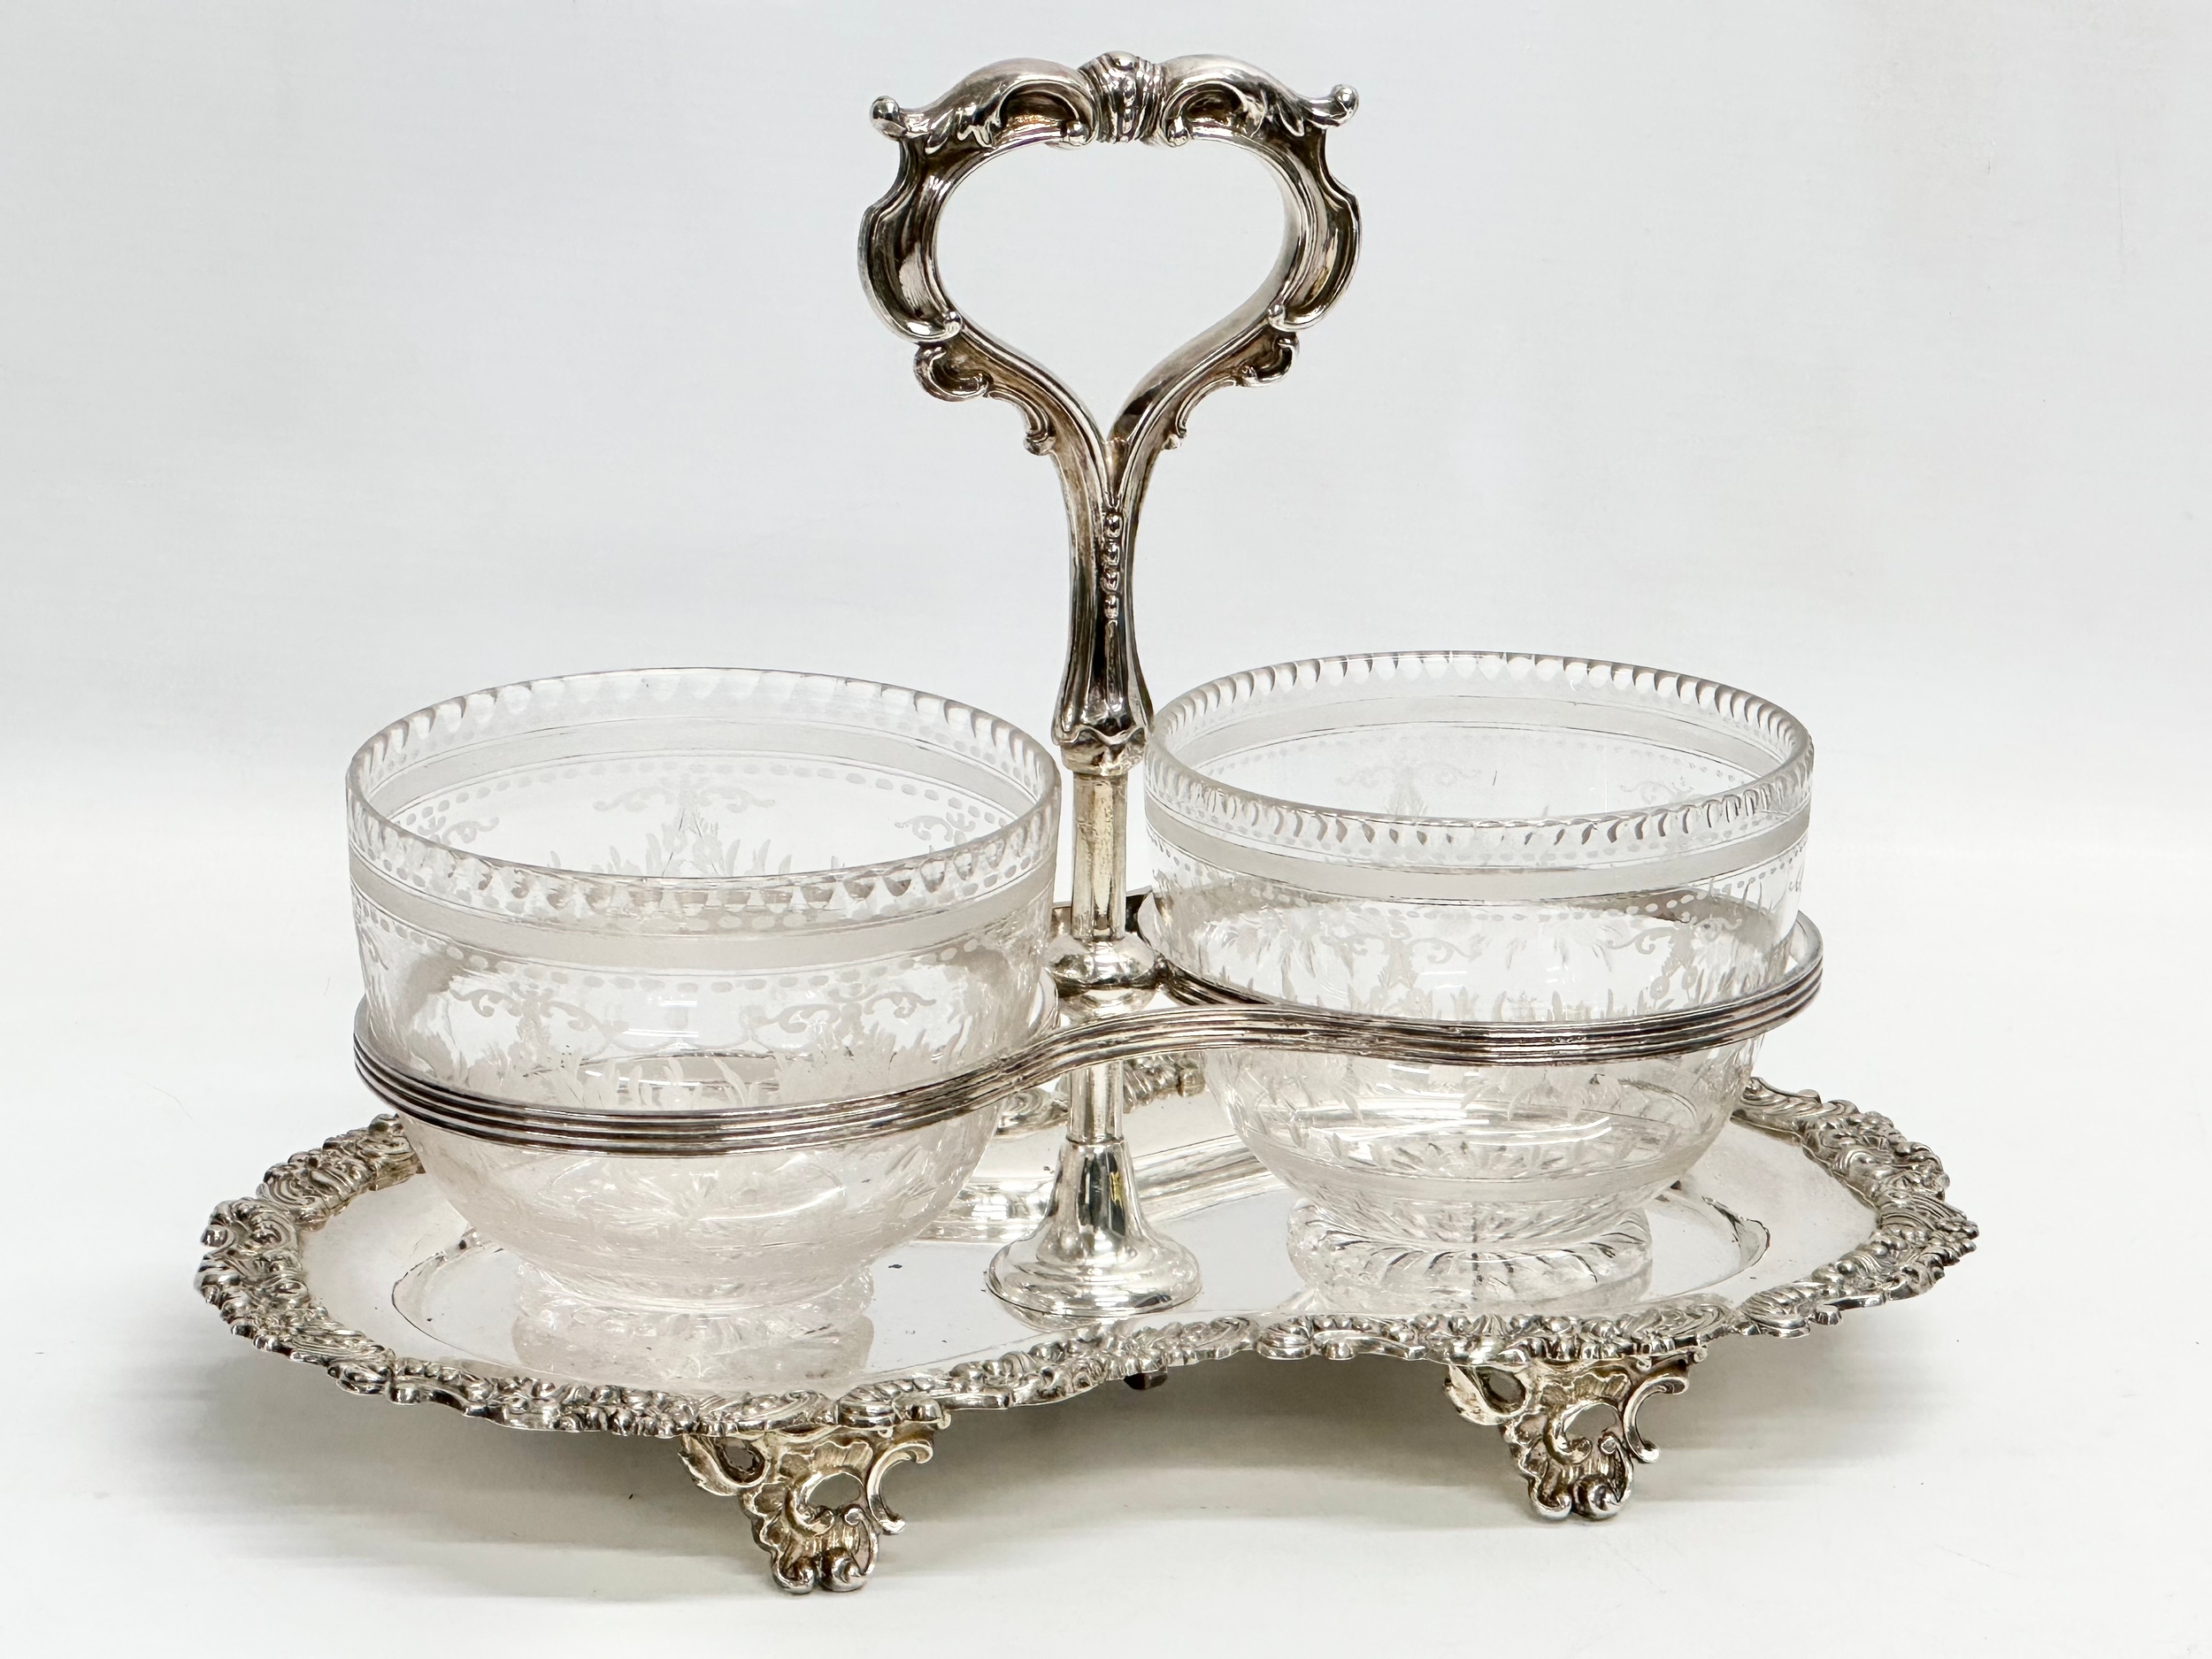 A Victorian silver plated sugar and cream stand/tea caddy, with etched glass bowls. Bowls measure